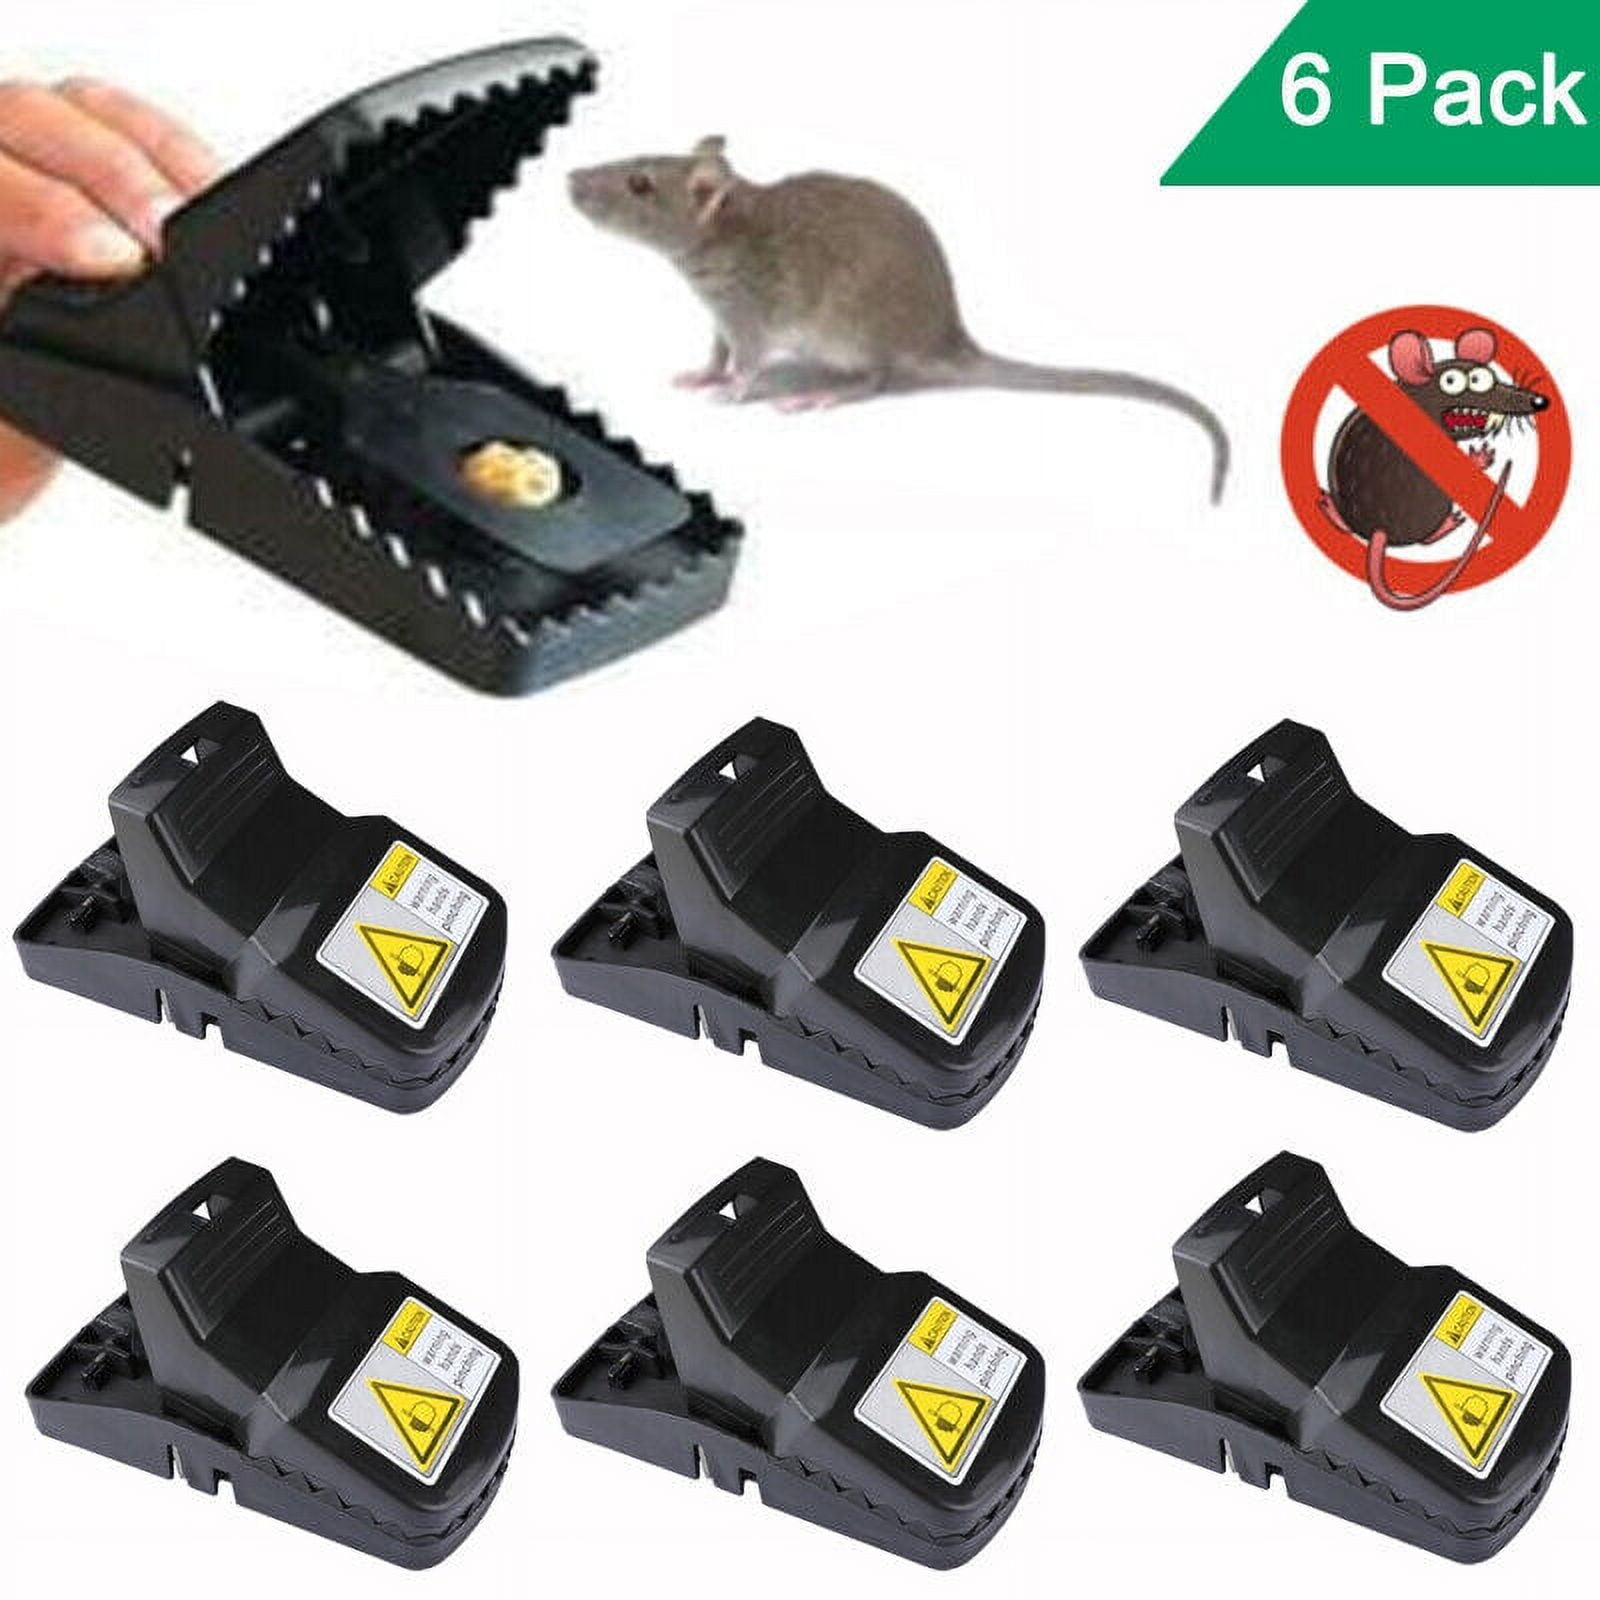 6 Pack Mouse Traps Rat Mice Killer Snap Trap Power Rodent Heavy